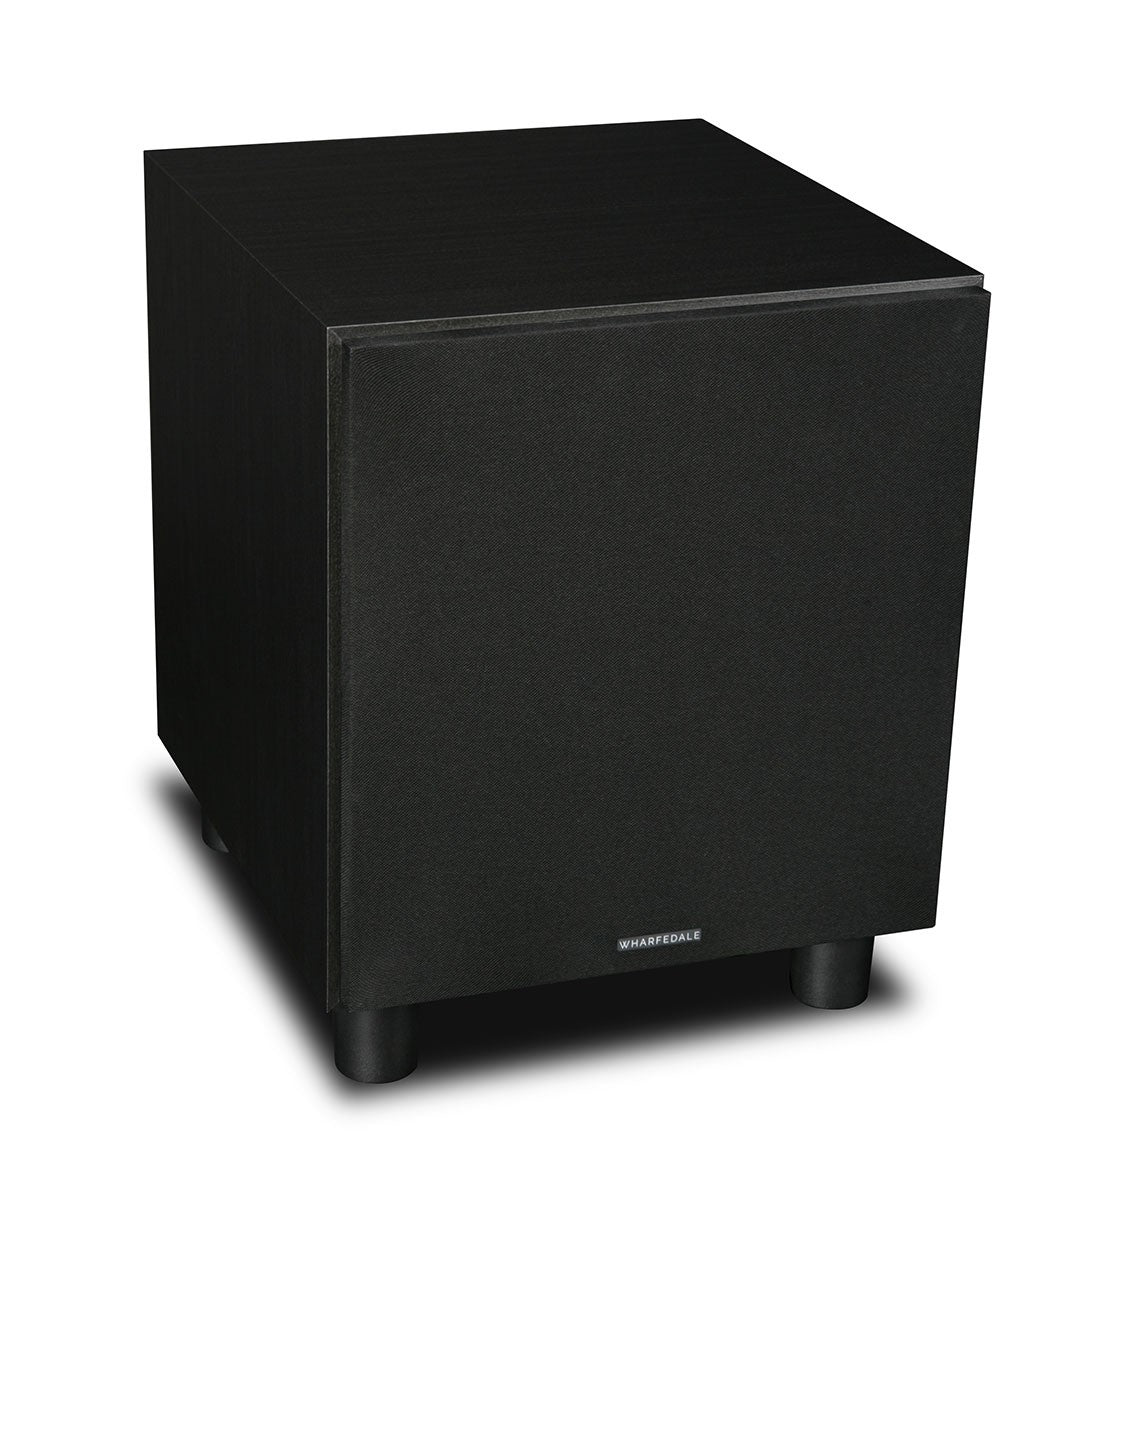 Wharfedale SW-12 subwoofer